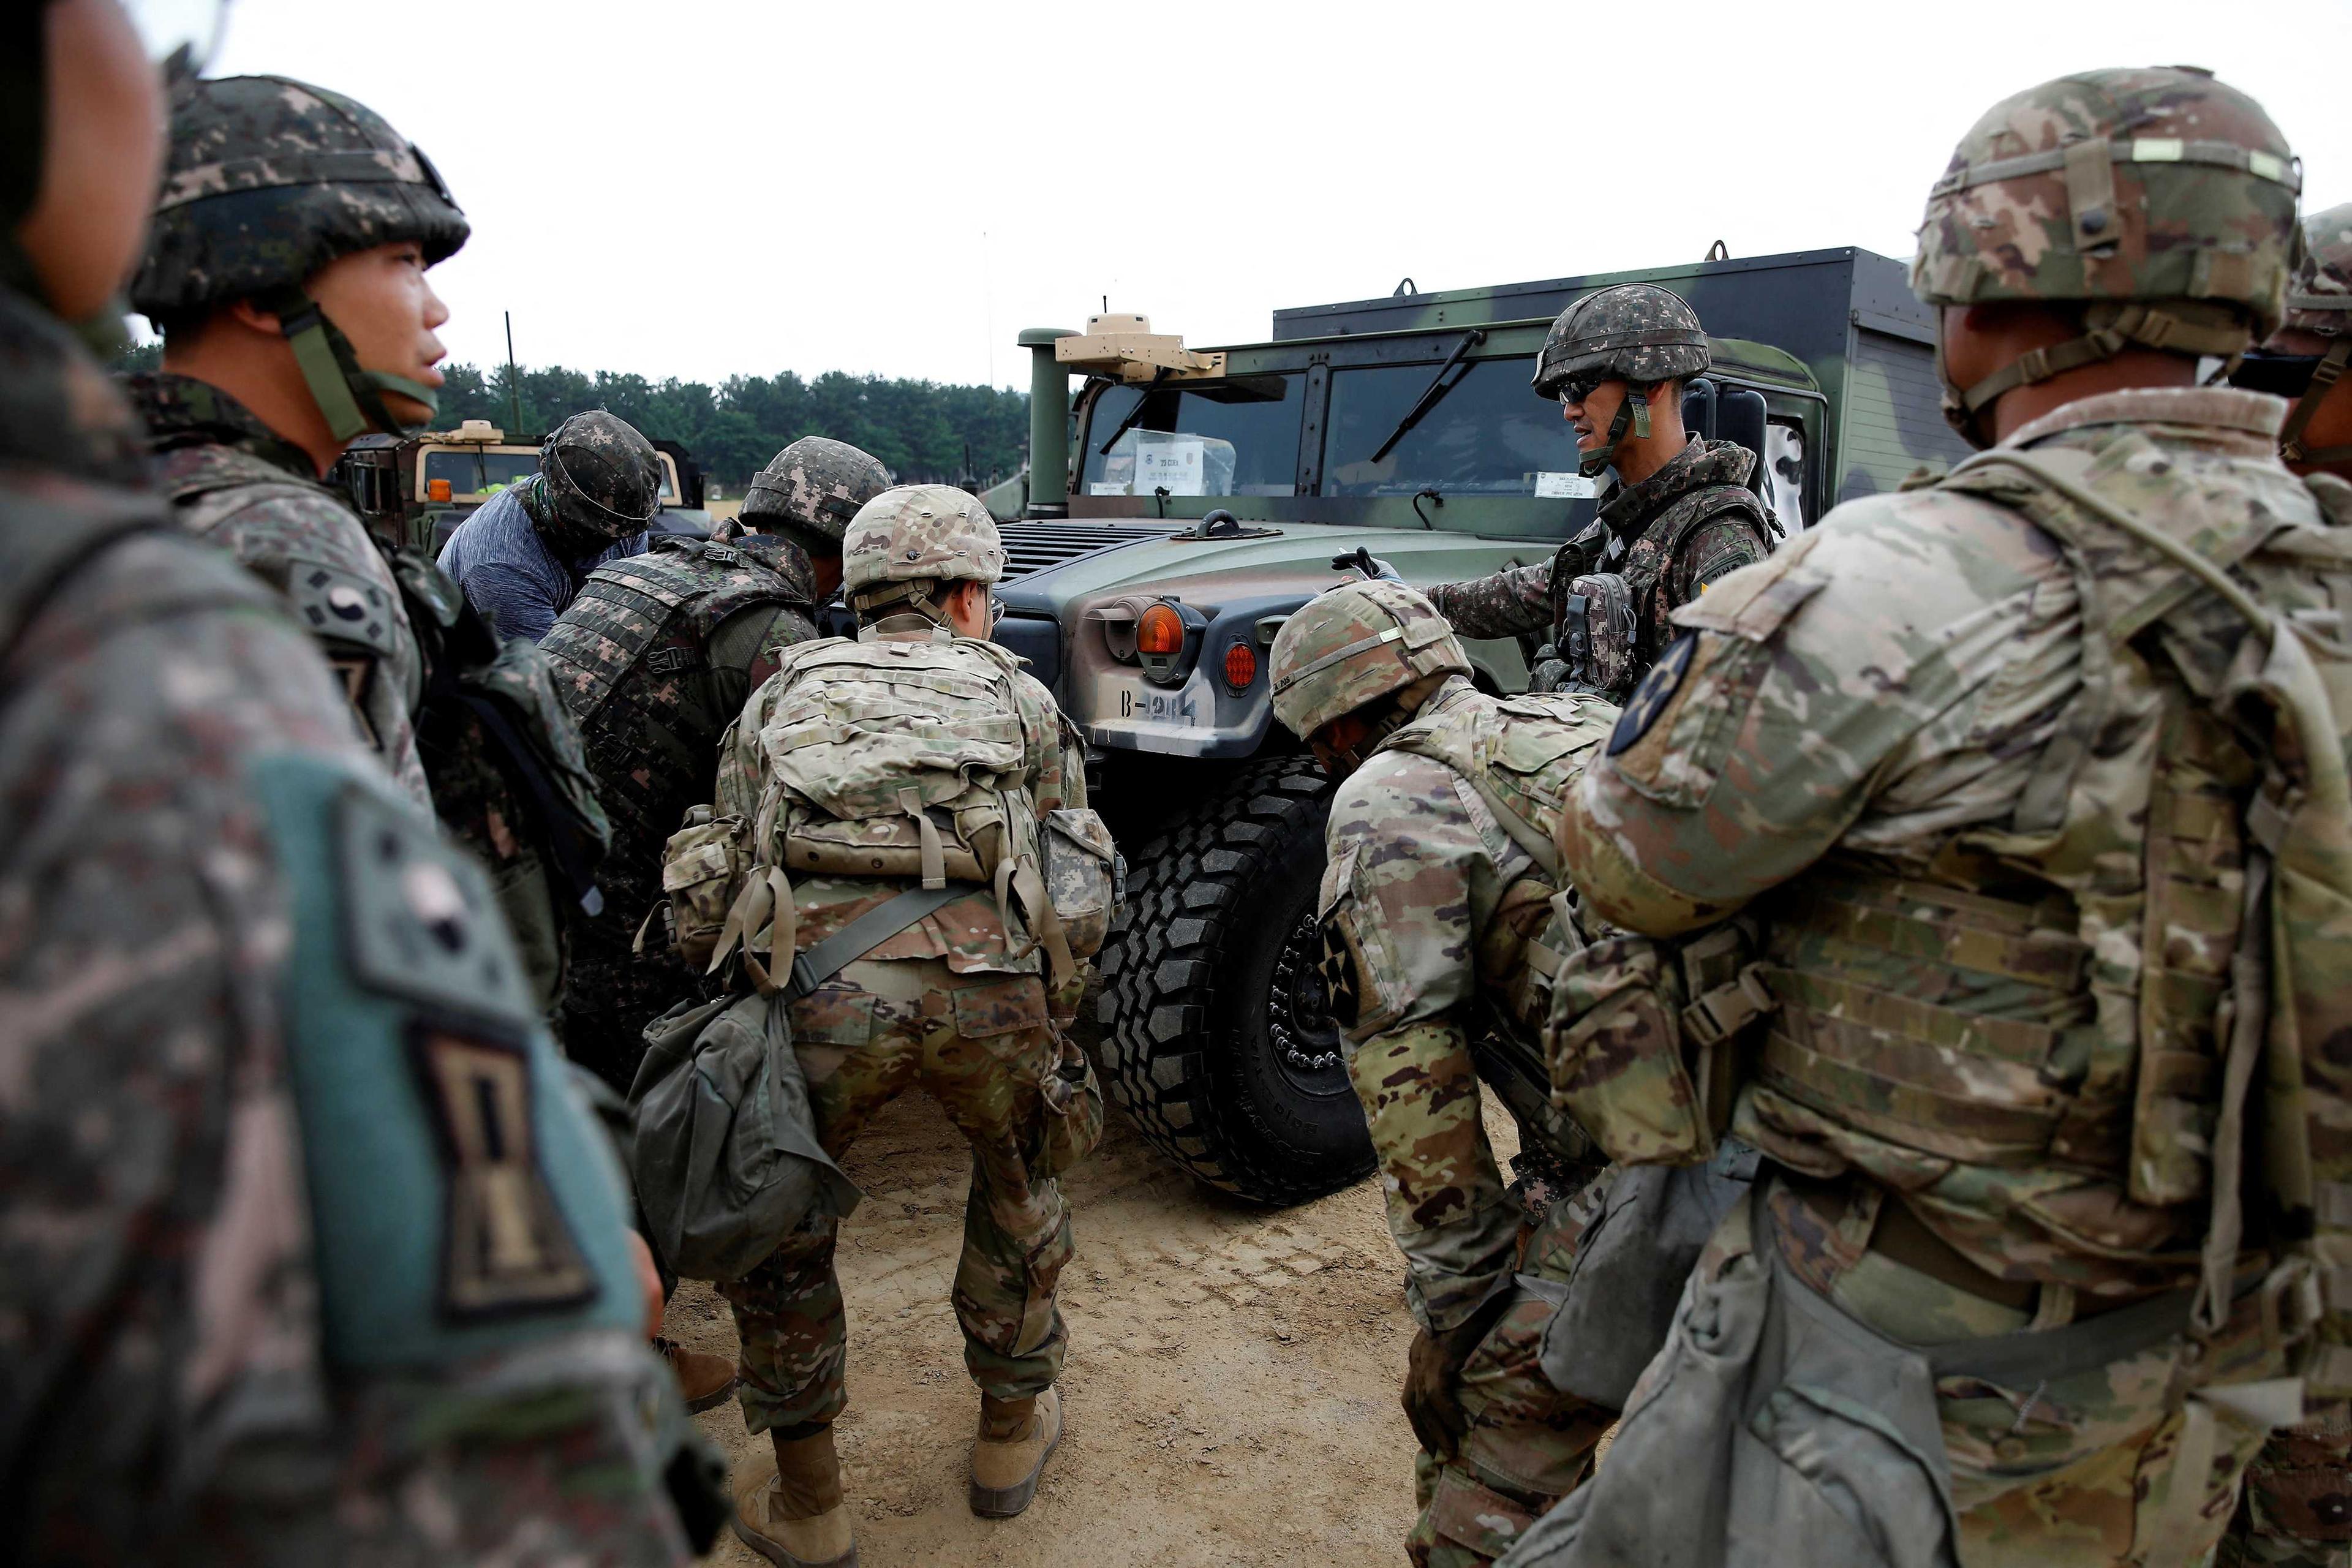 The South Korean 1st Army Military Support Brigade Soldiers and the US Army's 2nd Infantry Division participate in a CDEx (Combined Distribution Exercise) in Pohang, South Korea on June 13. Photo: Reuters